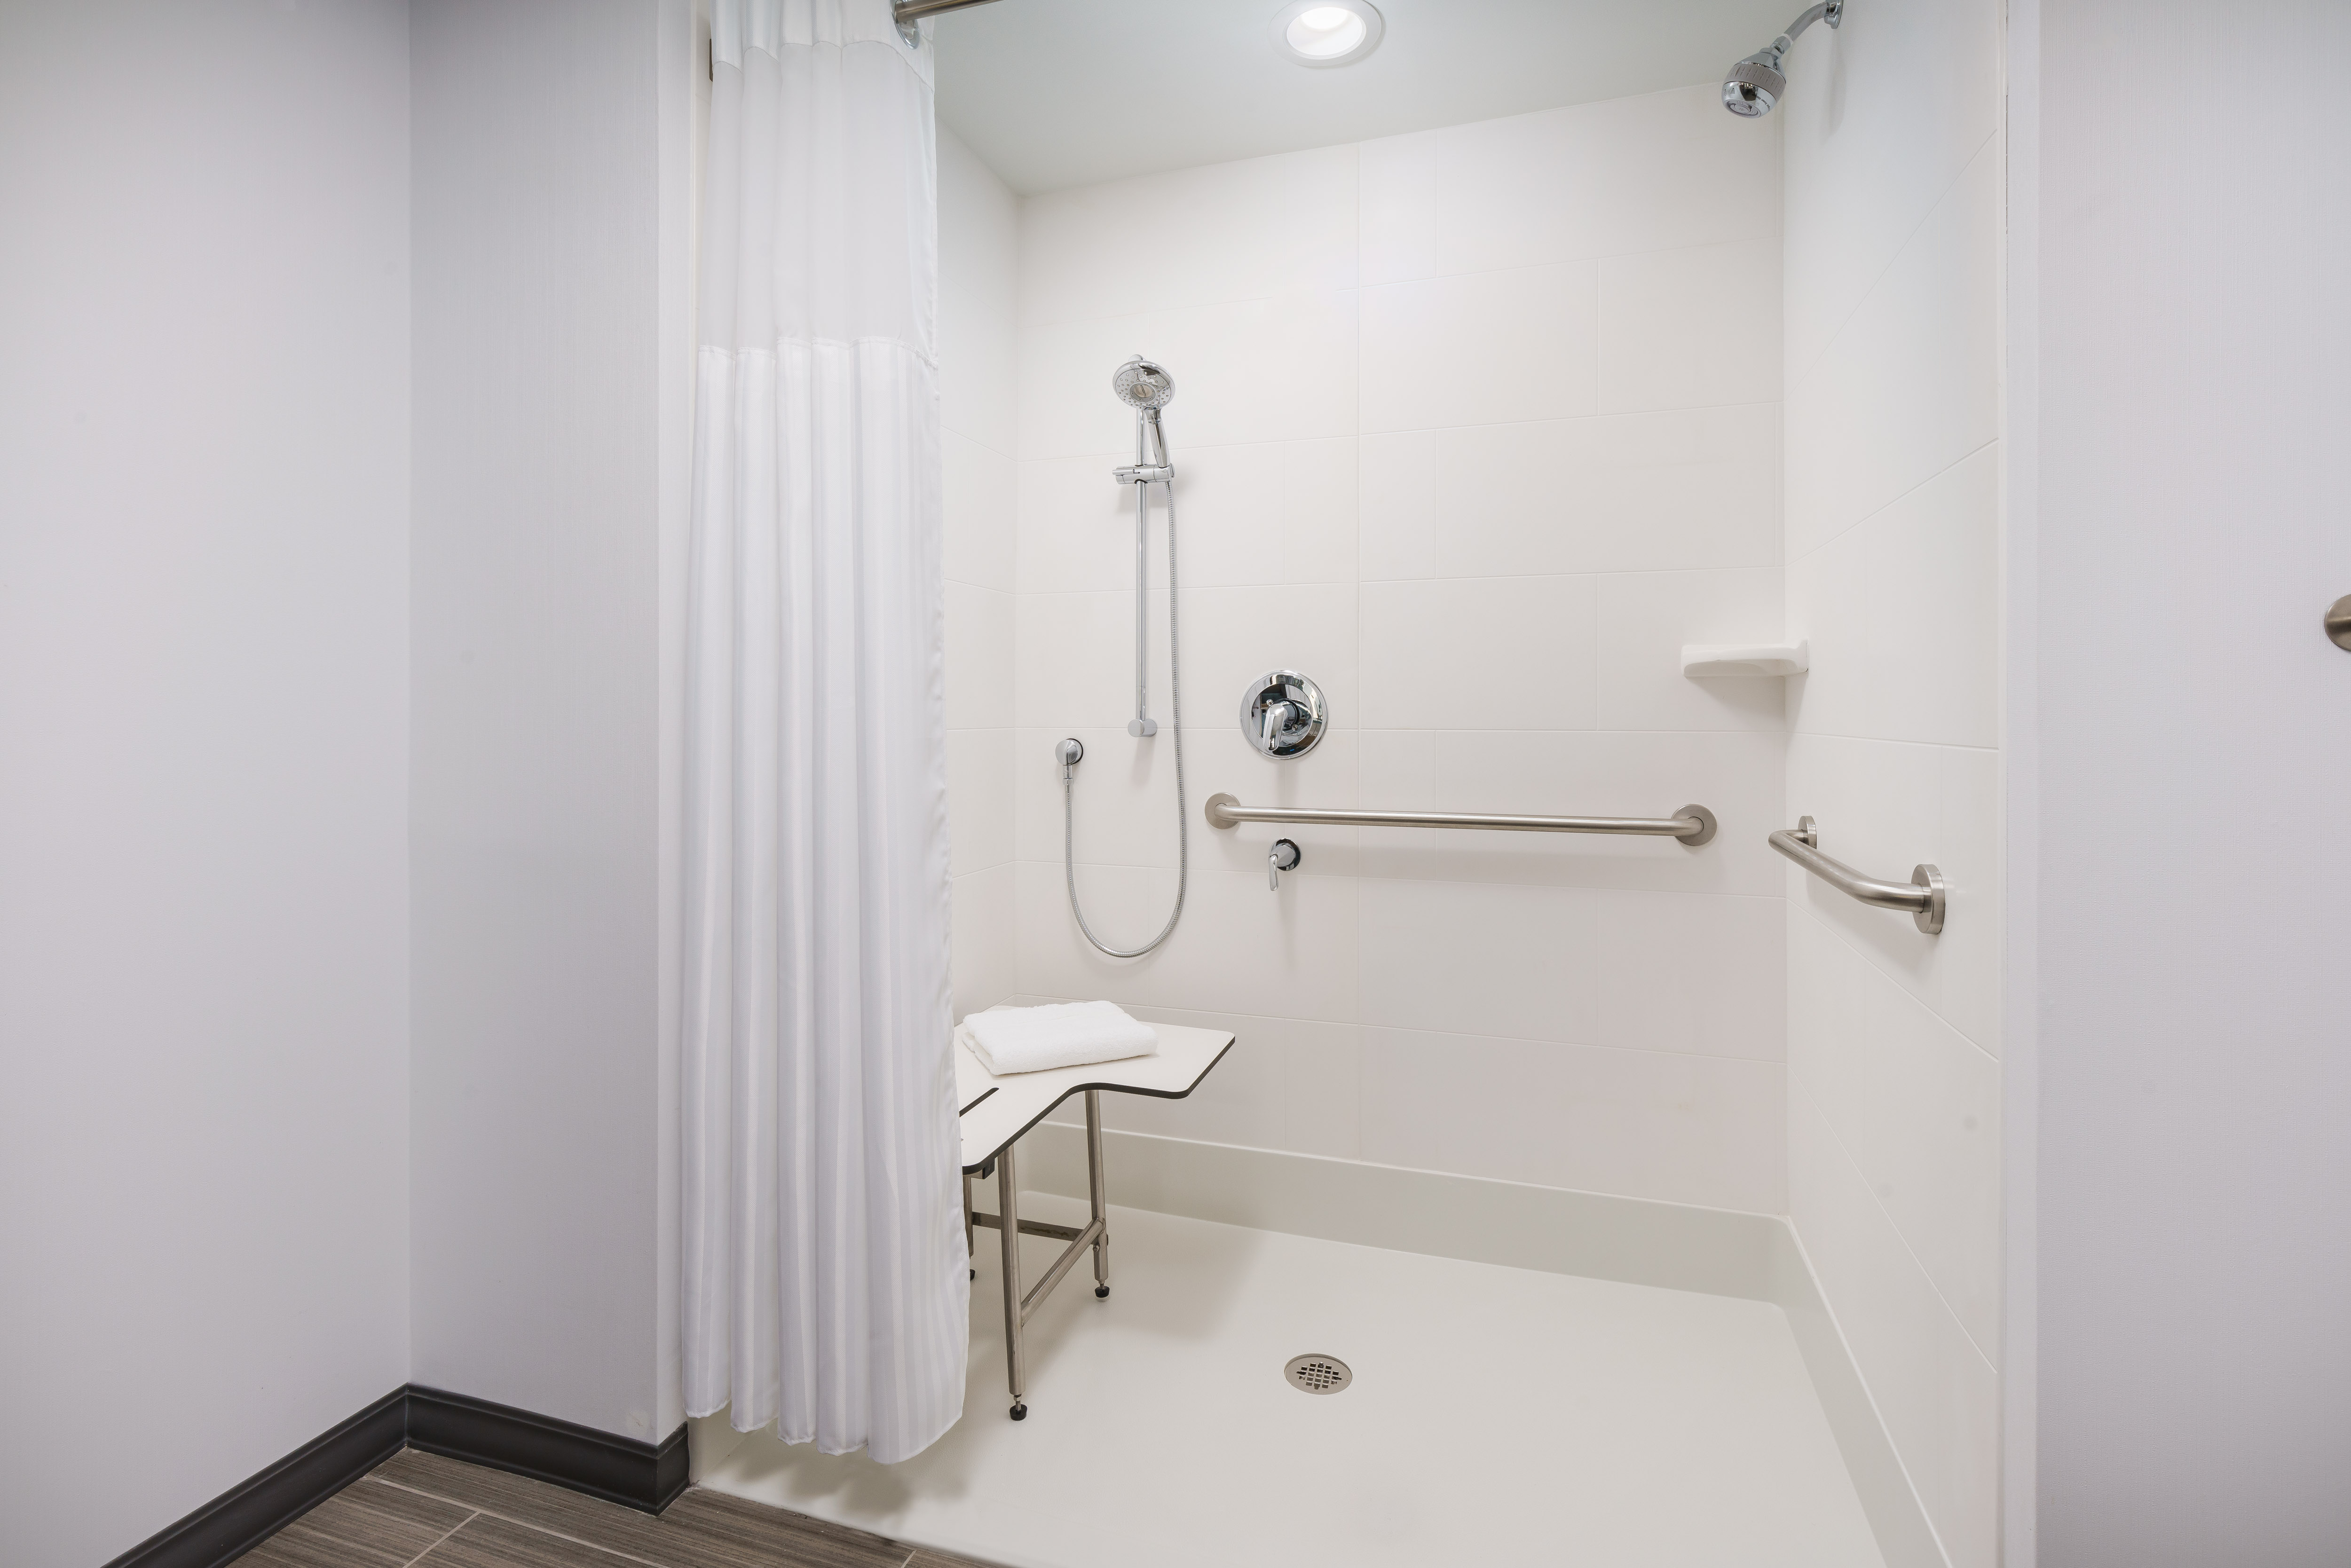 Bathroom with roll-in shower